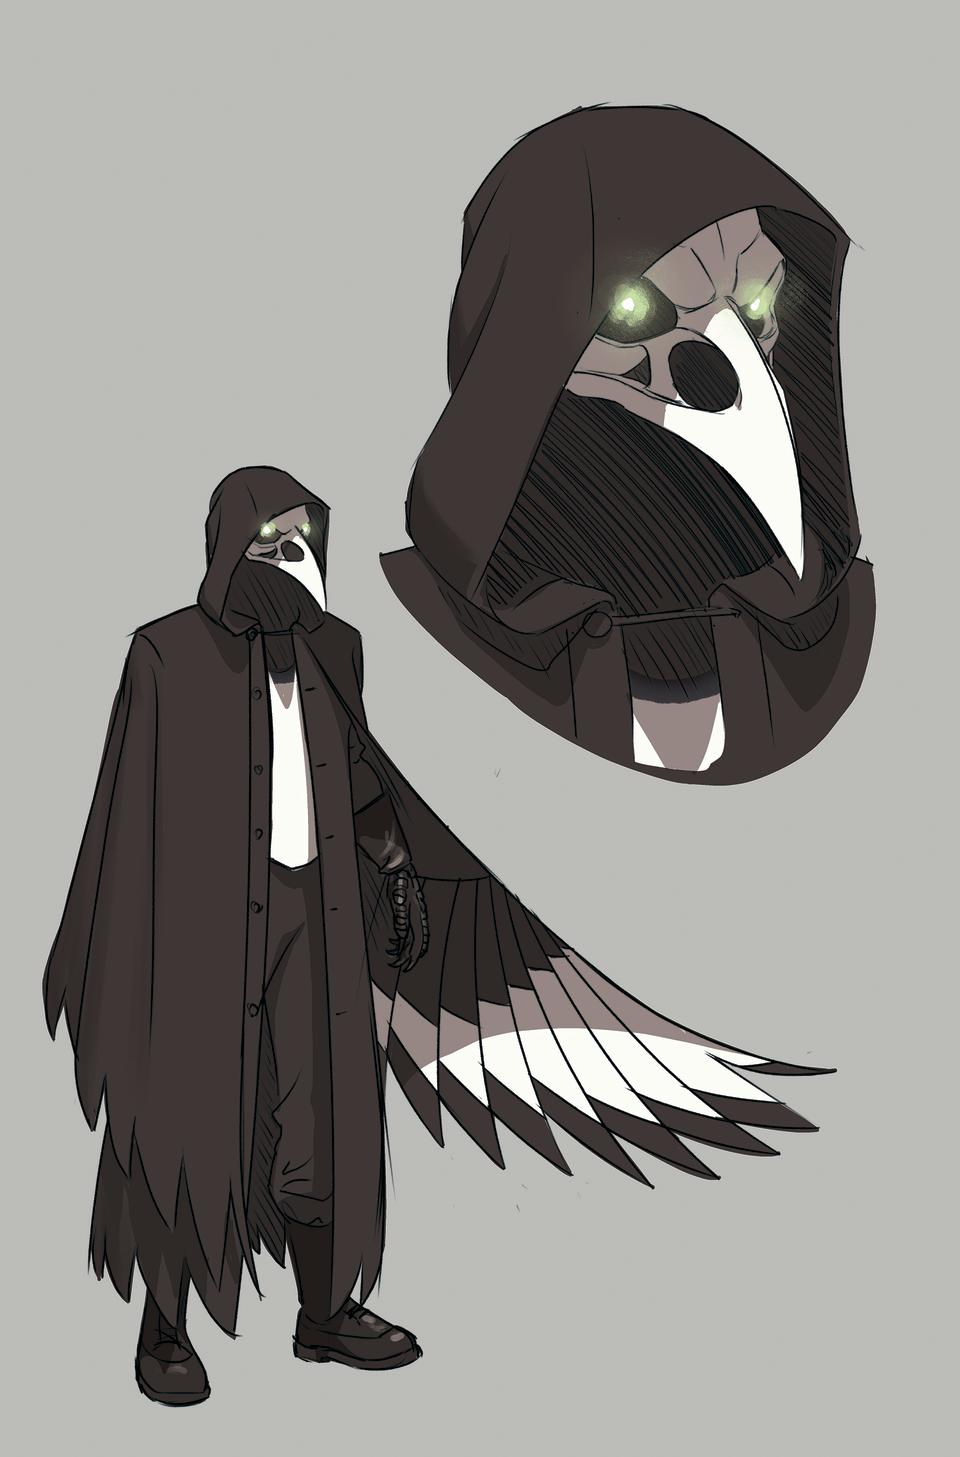 Character designs from One For Sorrow